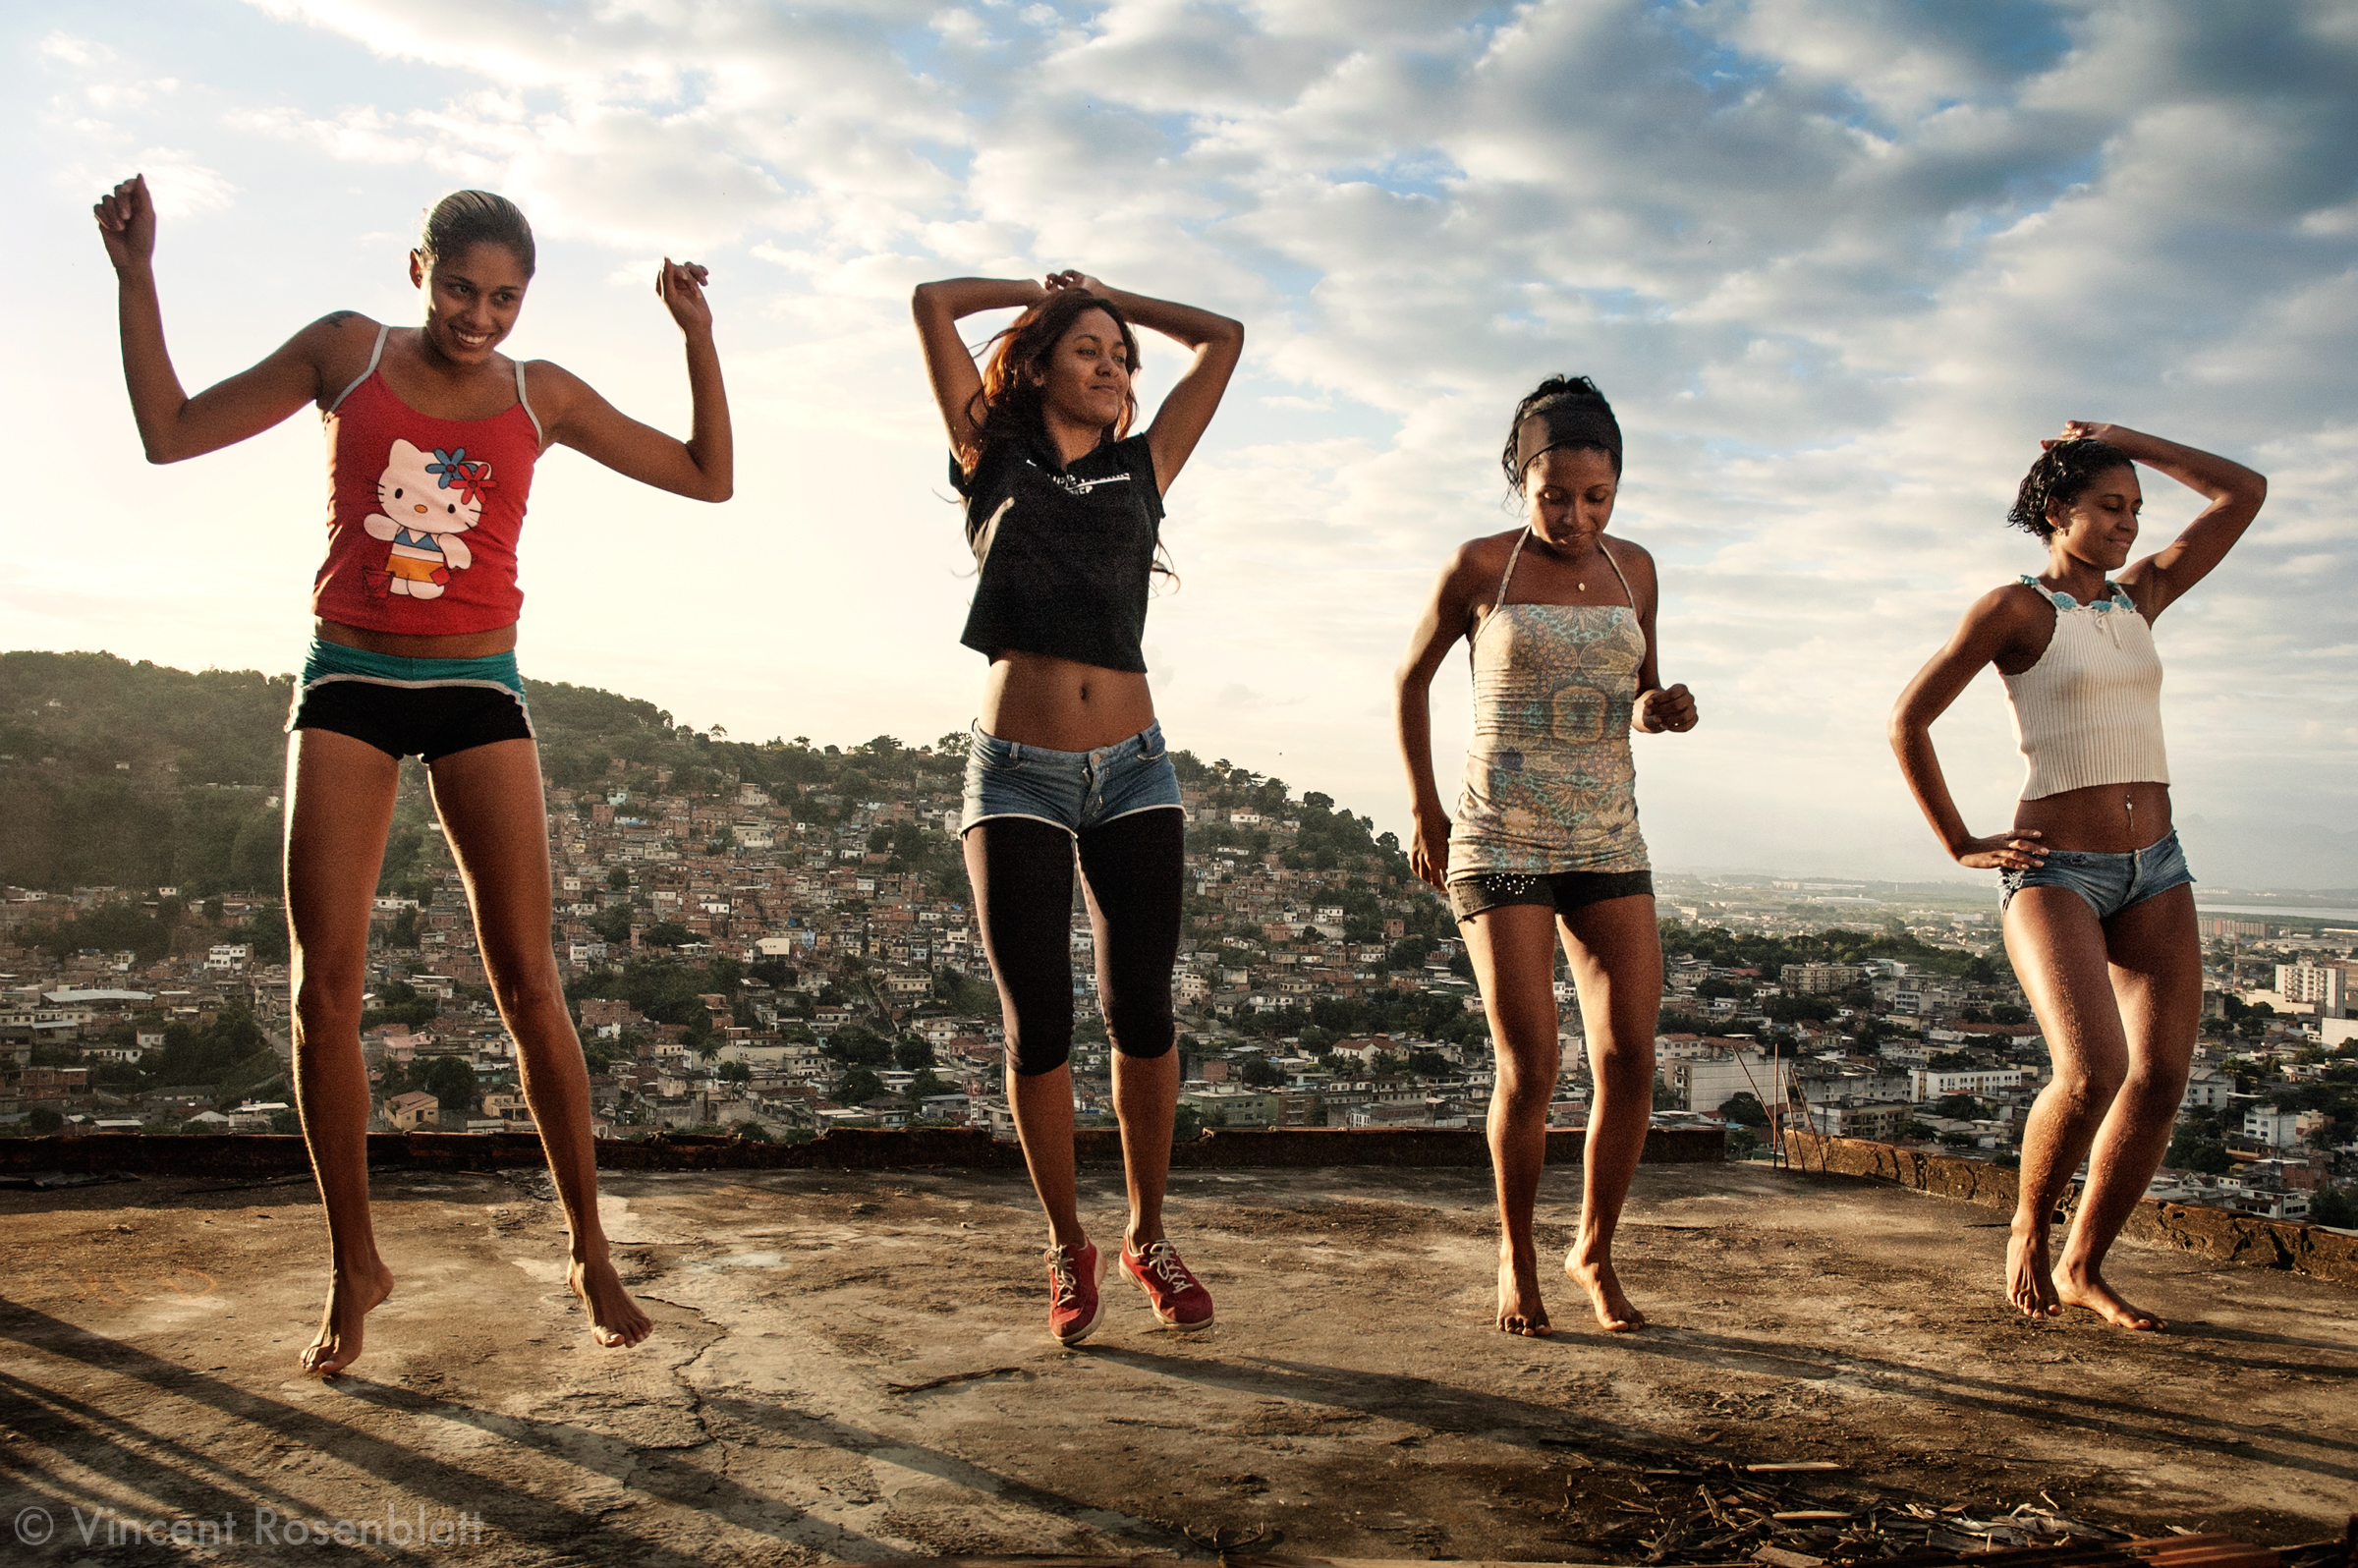  Funk on the rooftops. Elaine, Cris, Aninha & Dani, of the "Tchutchucas" band, are rehearsing their new choreography on the rooftop of Elaine's house in the Vila Cruzeiro favela, Rio de Janeiro. Their spicy rap responds to the MCs'macho attitude. 